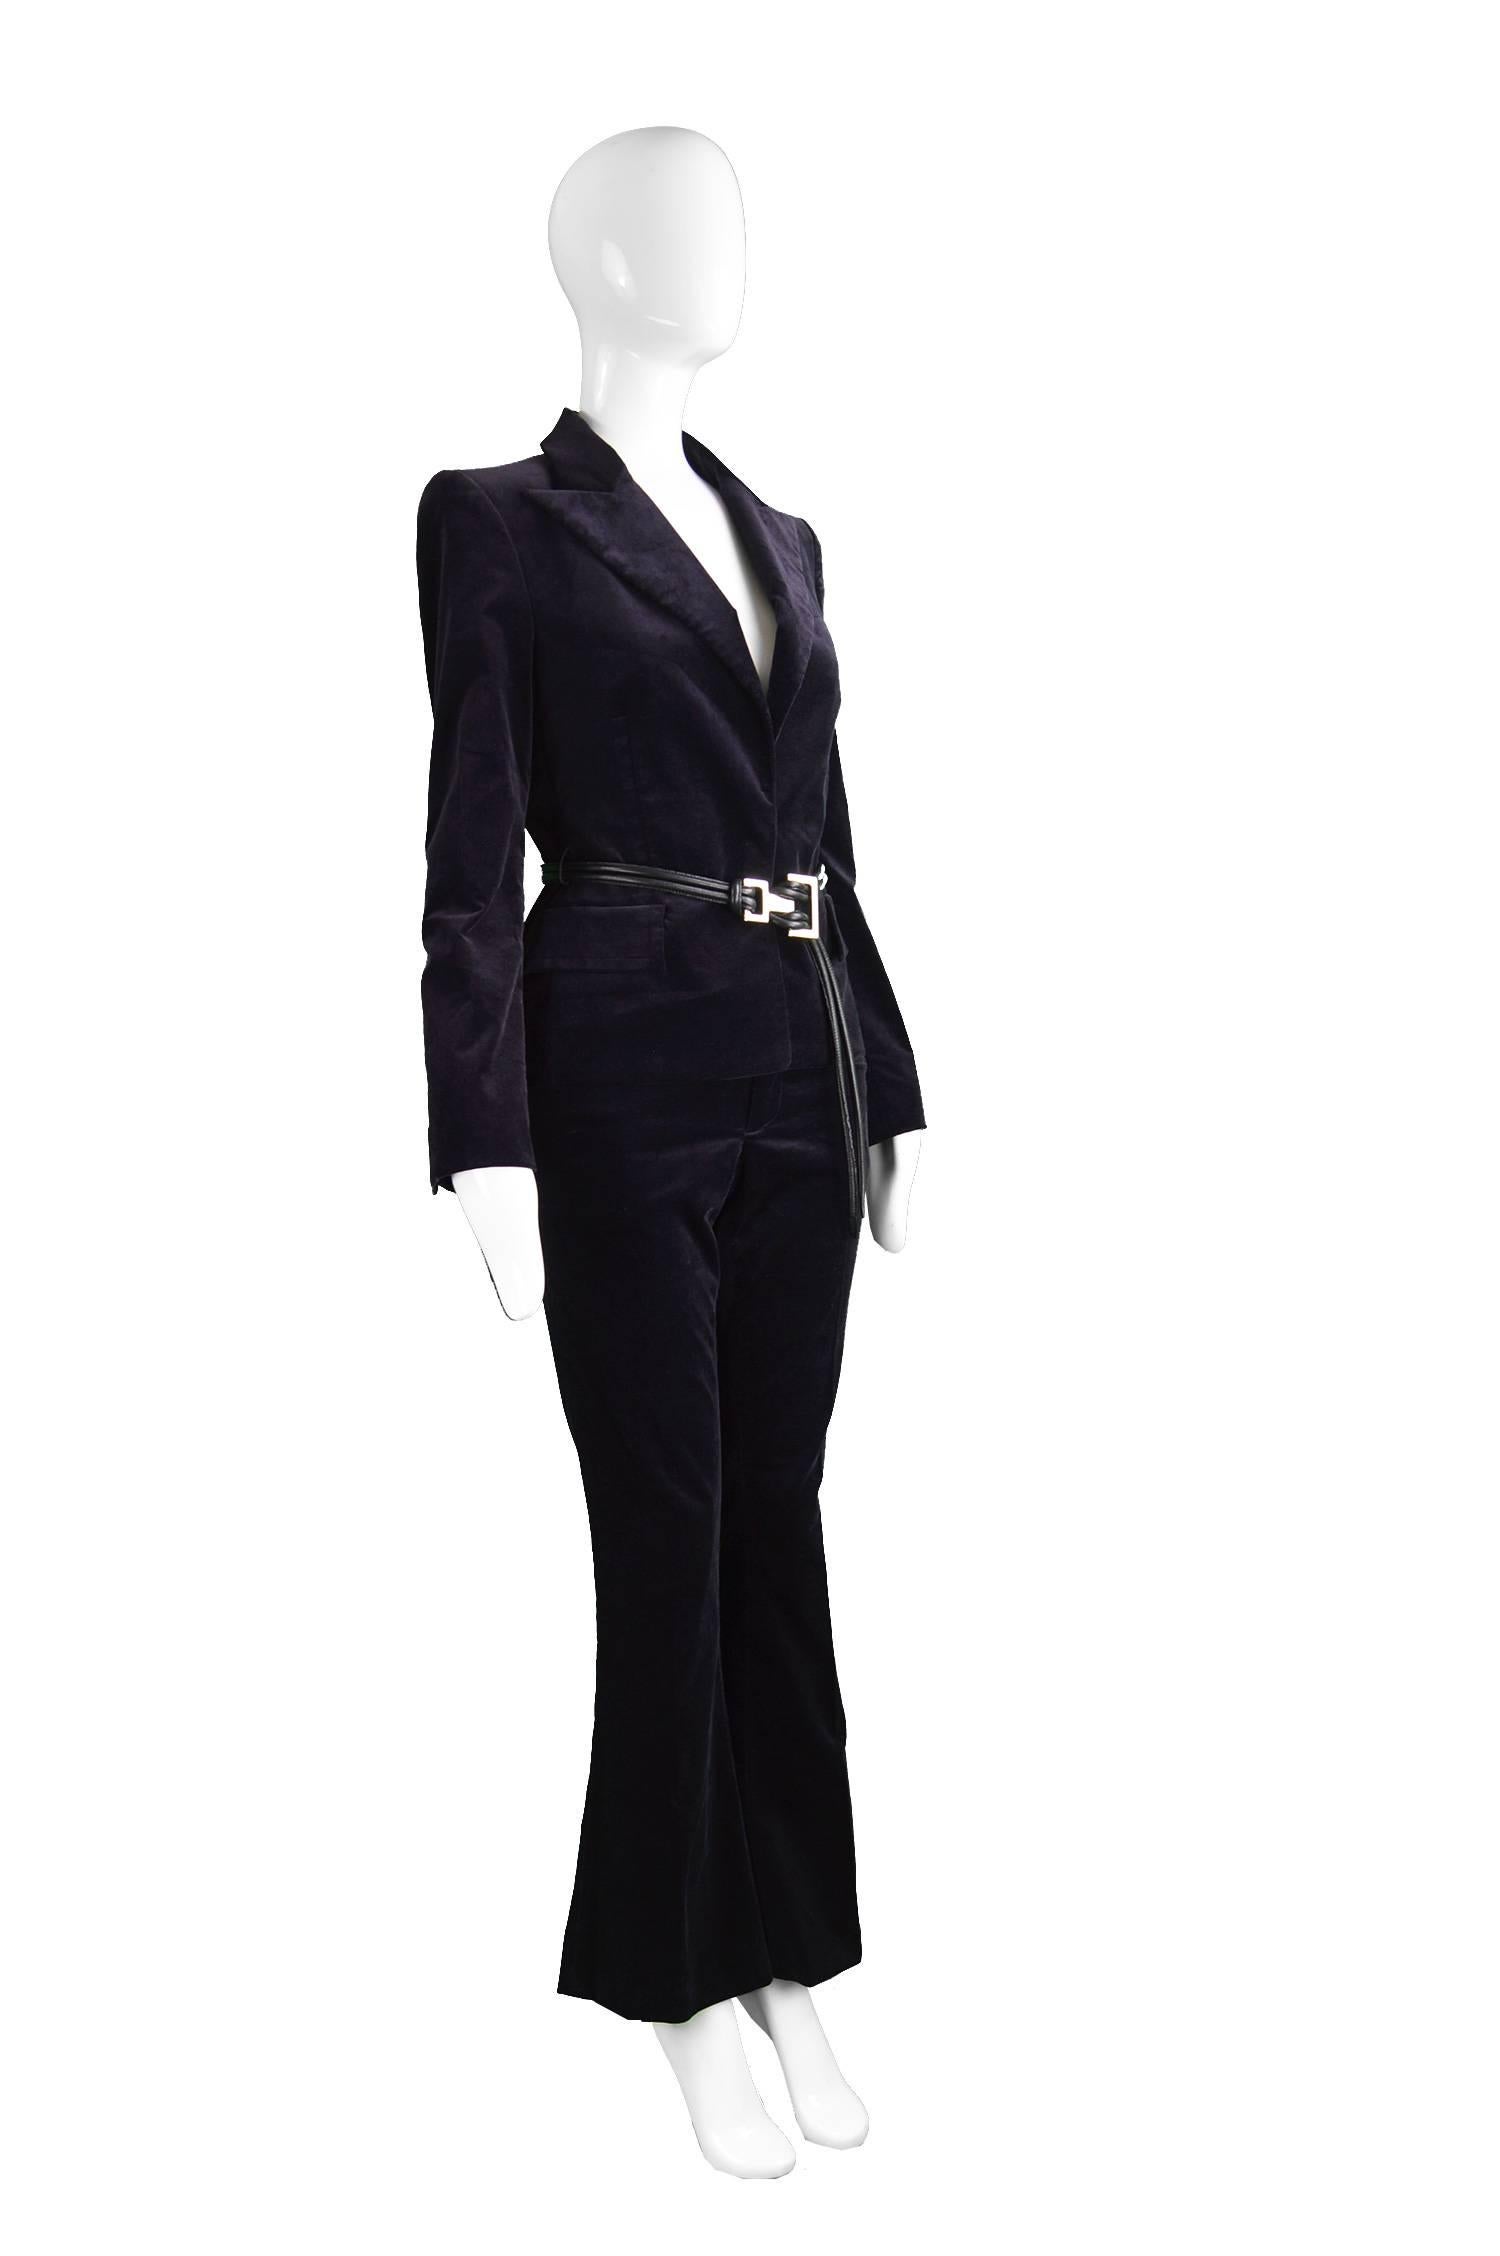 Black Tom Ford for Gucci Dark Purple Velvet Pant Suit with Leather Belt, Fall 2004